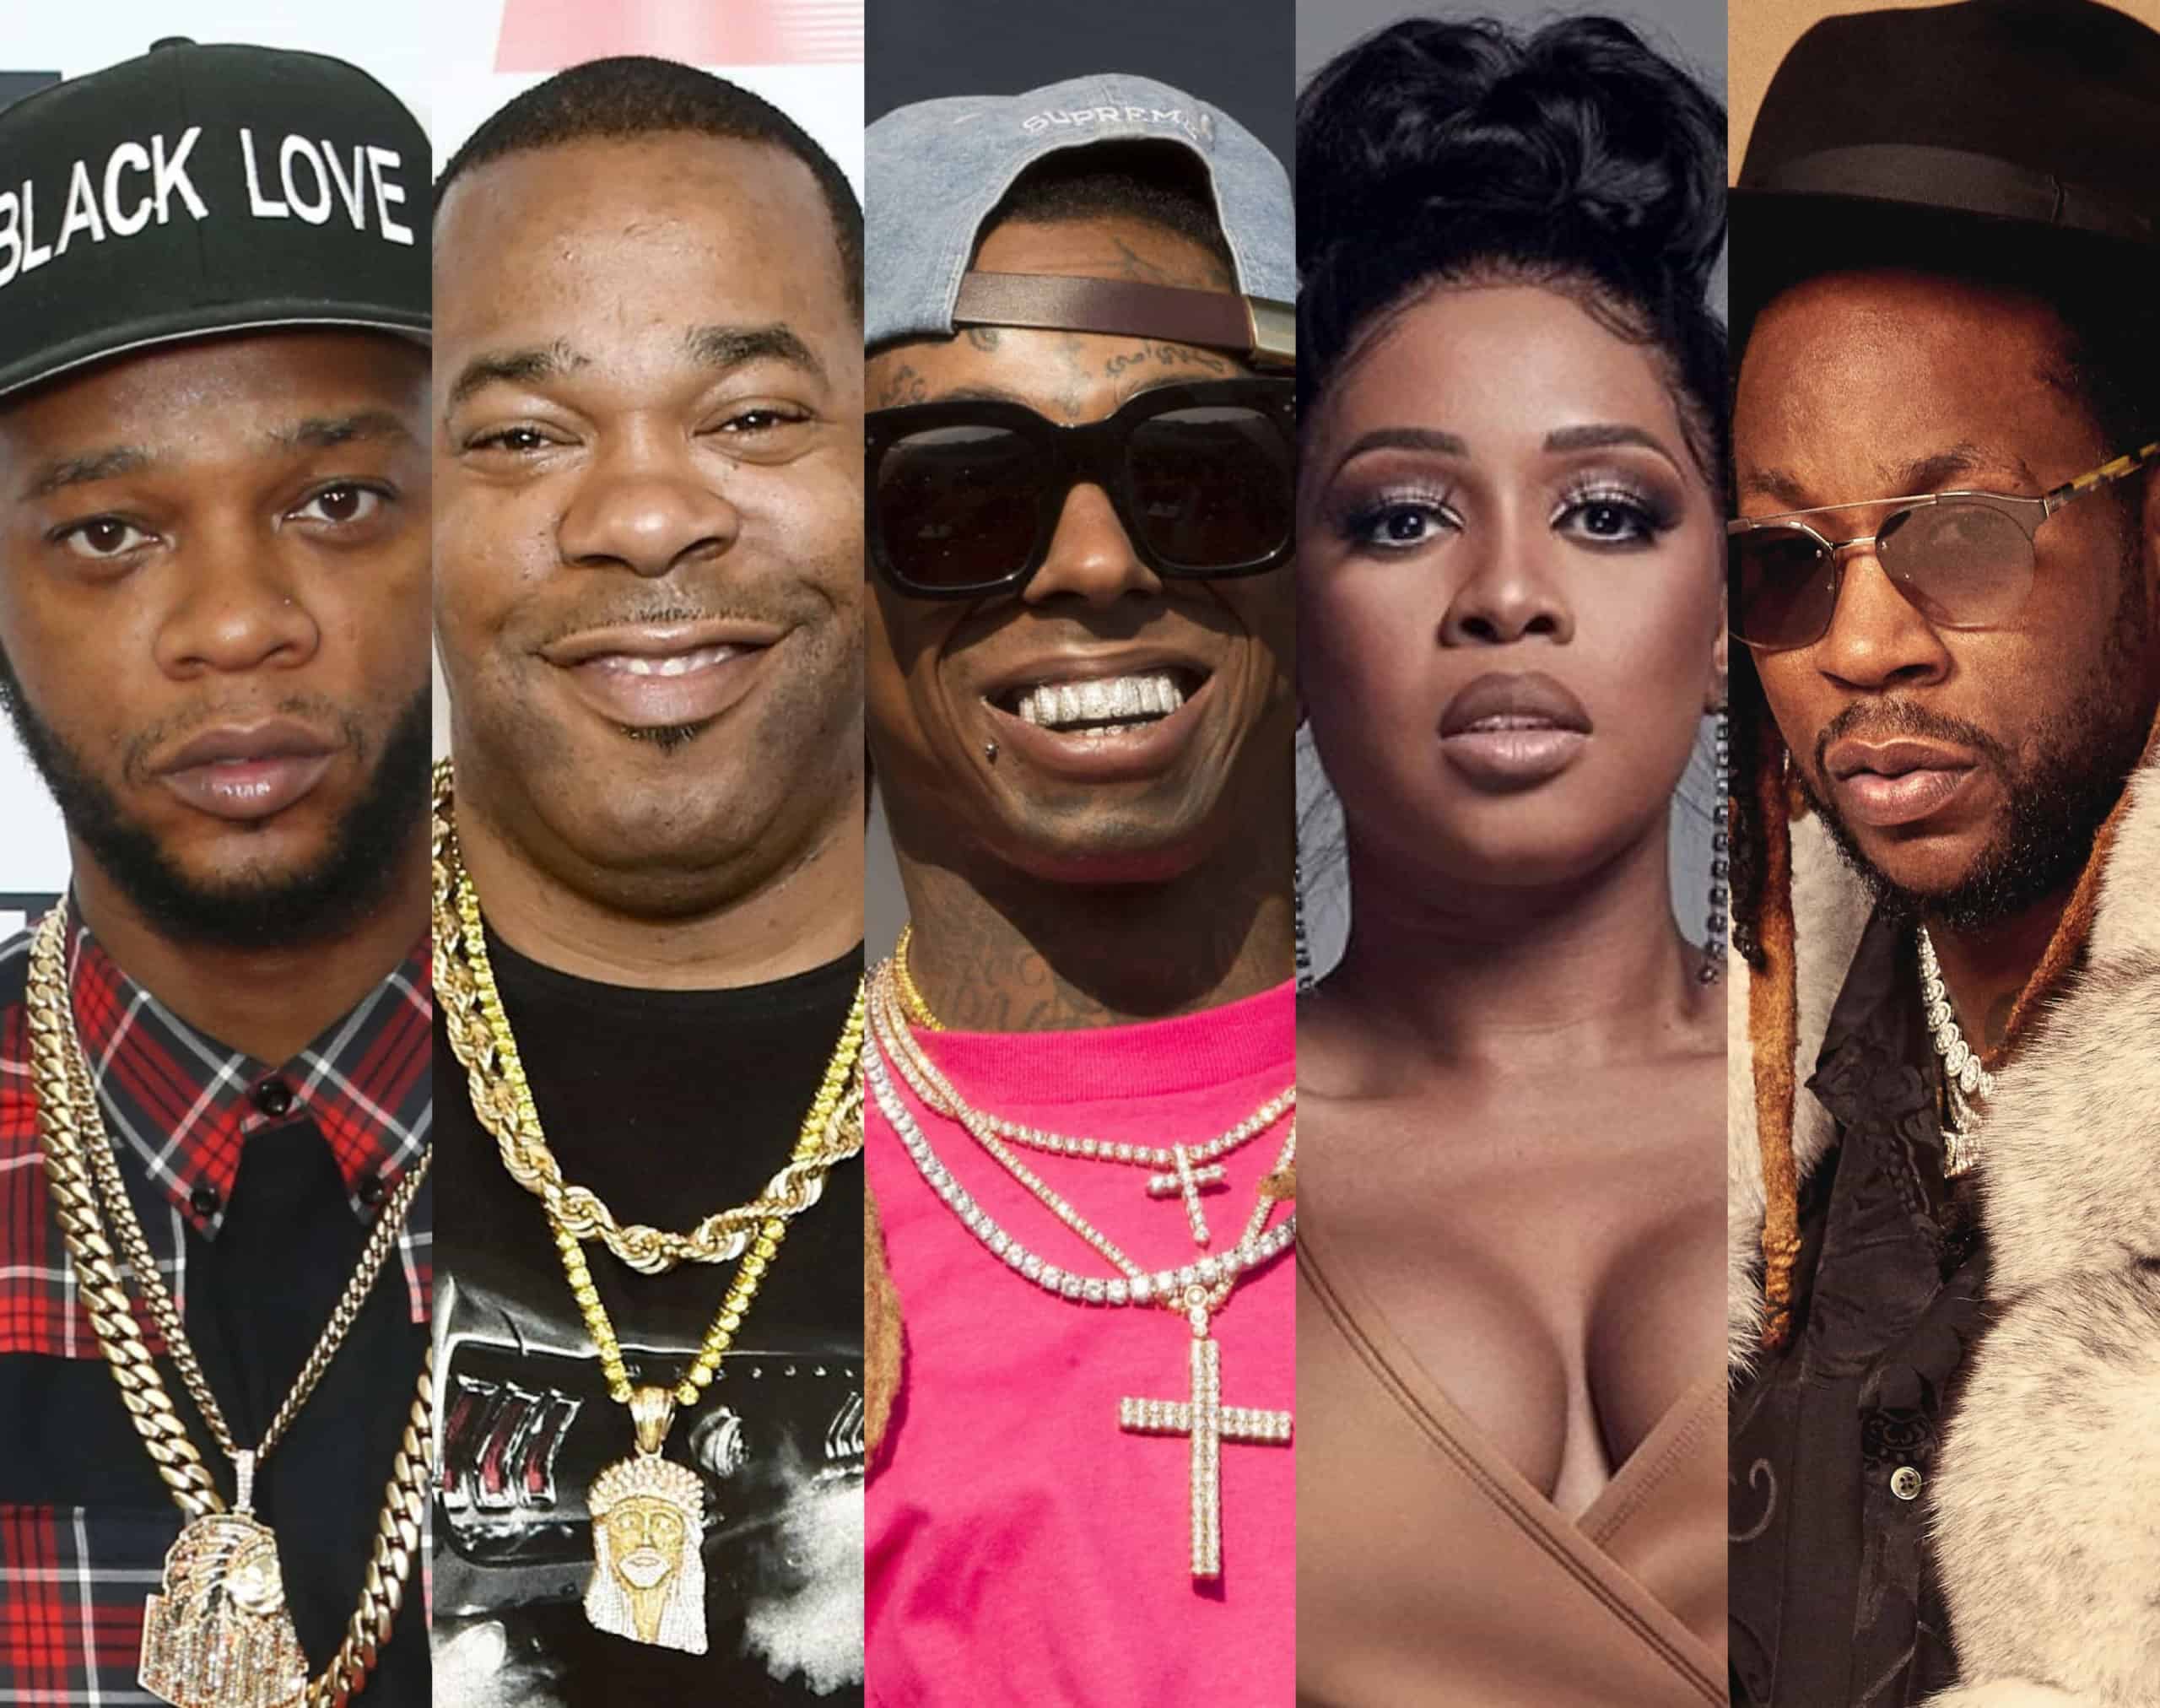 Papoose Releases Thought I Was Gonna Stop Remix With Lil Wayne, Busta Rhymes, 2 Chainz & Remy Ma